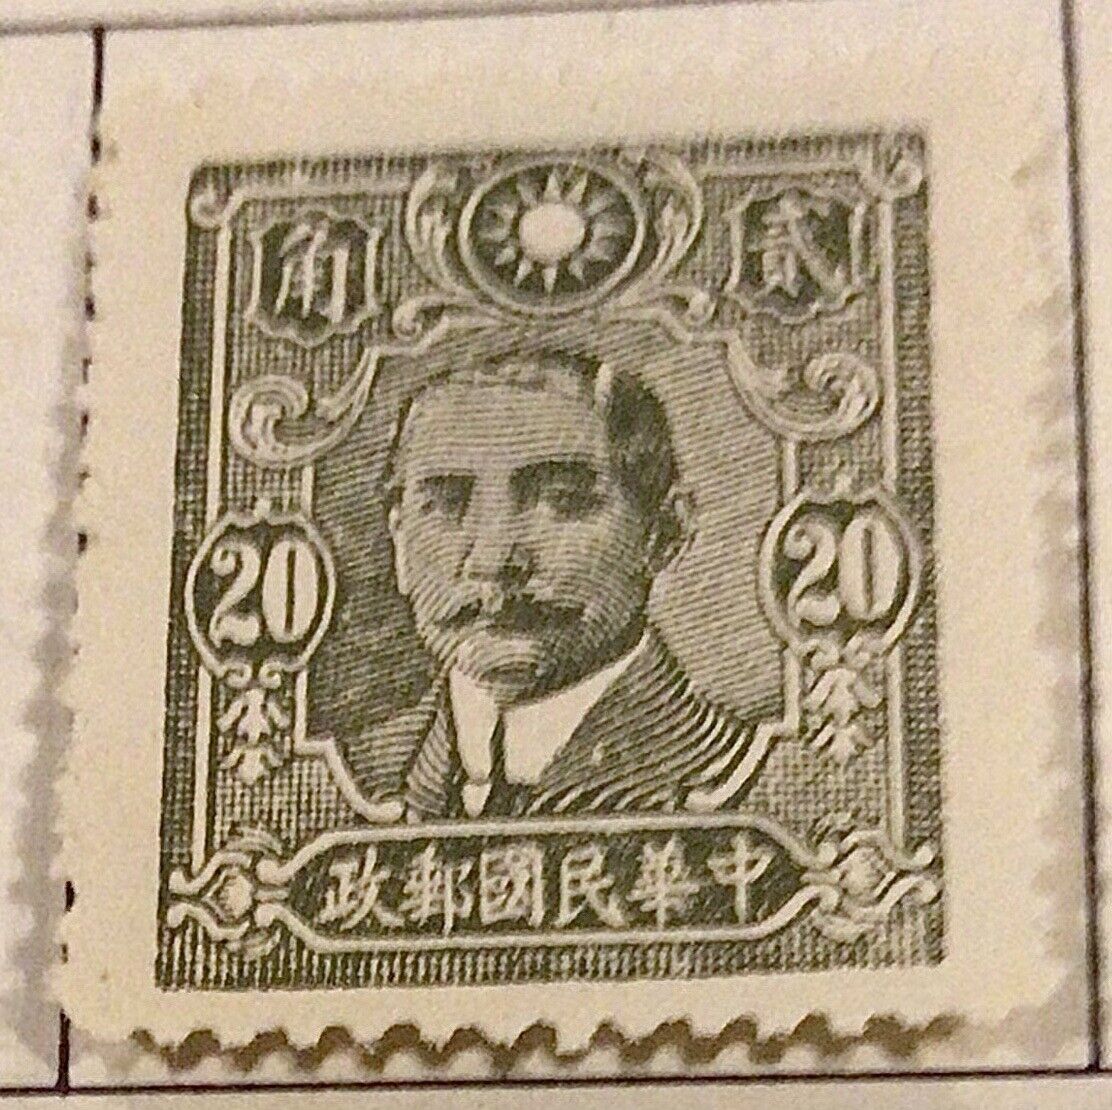 China 1942-1946 20 cent Stamp Mint/Hinged Extremely Rare